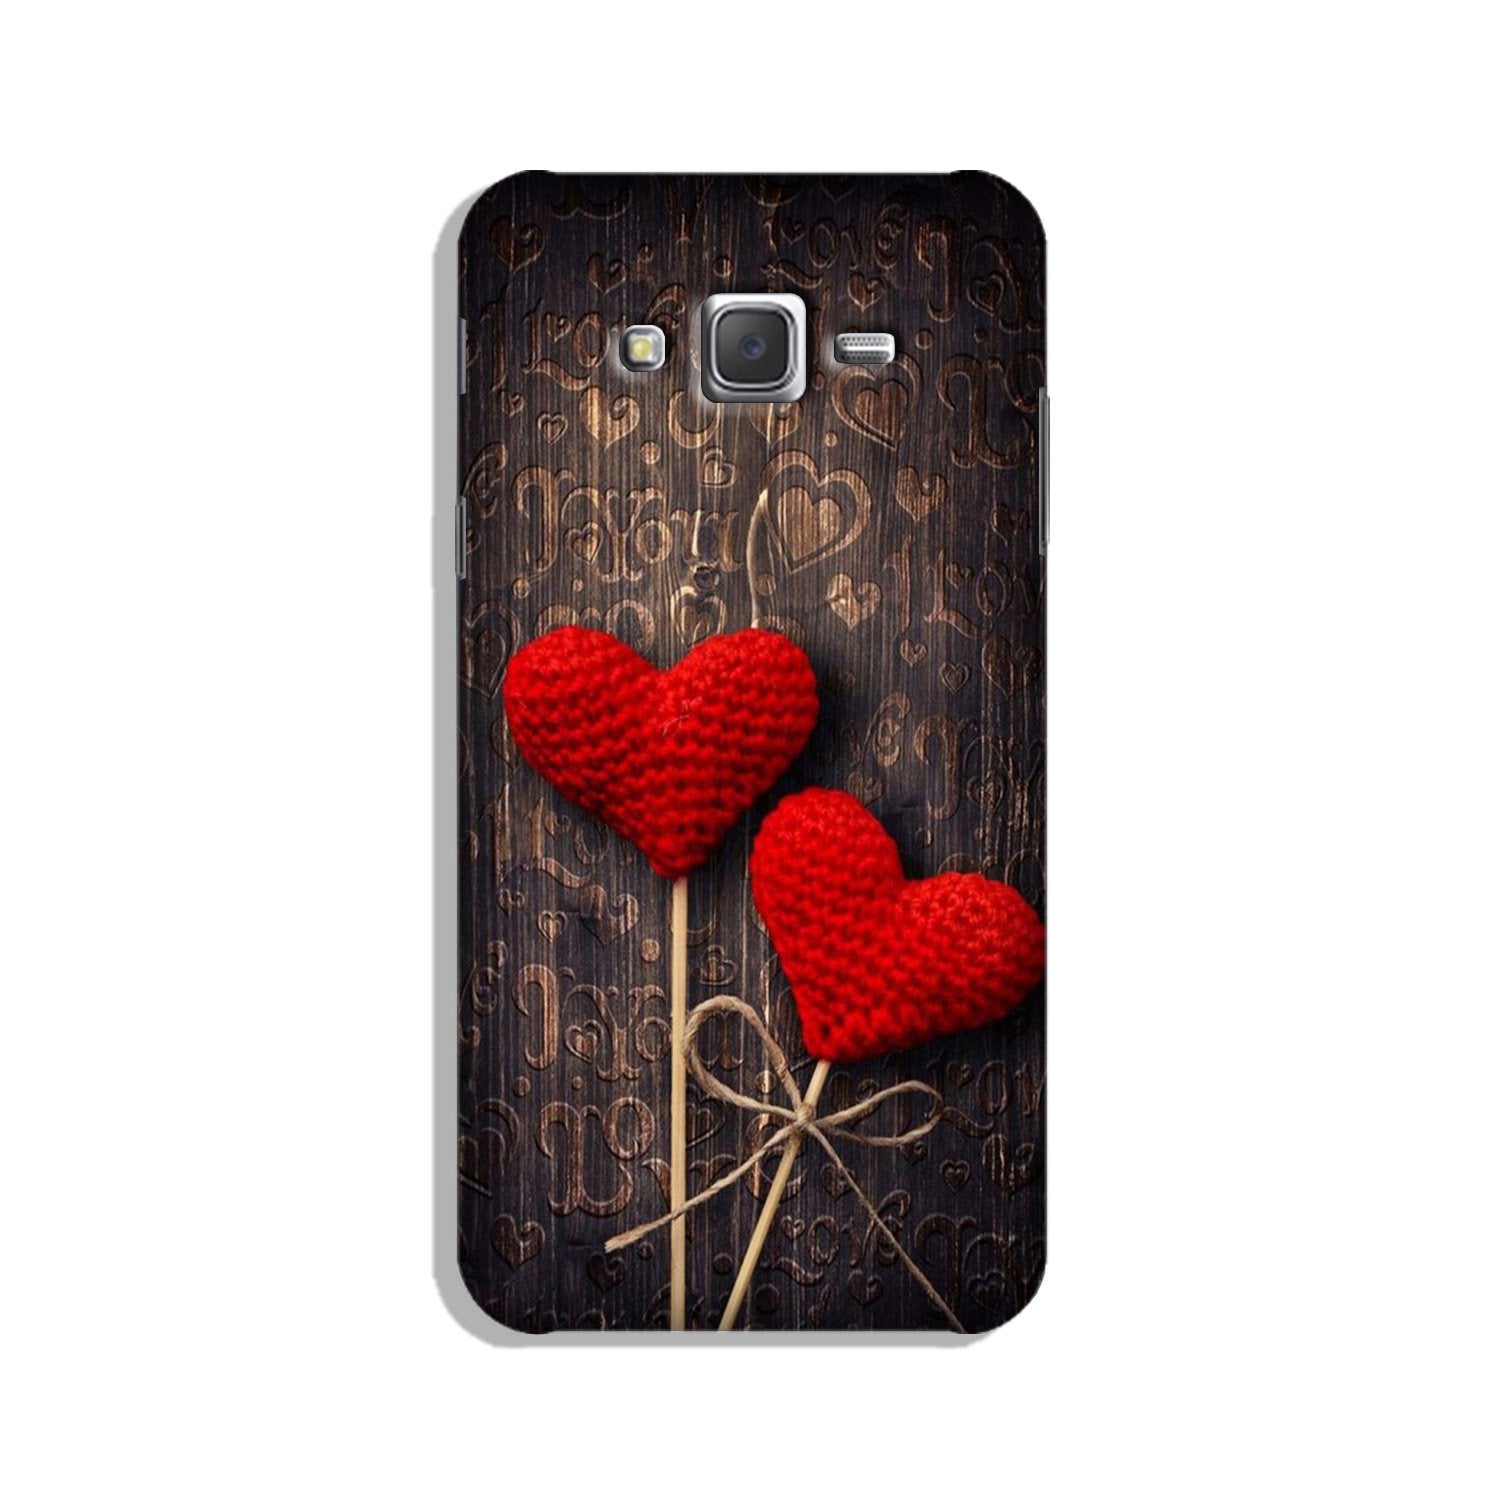 Red Hearts Case for Galaxy J3 (2015)